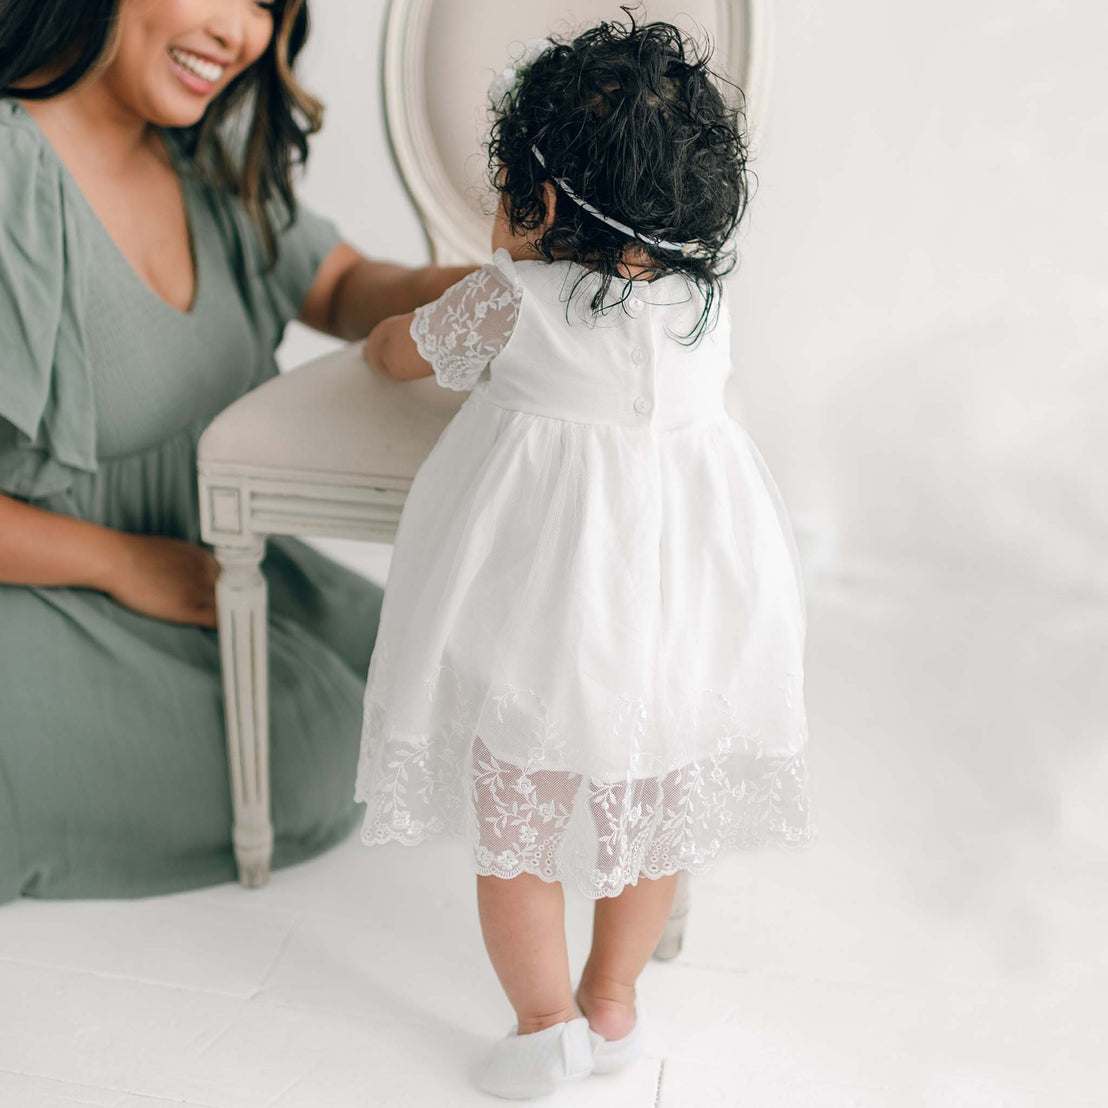 A woman in a light green dress kneels next to a toddler wearing an adorable Ella Romper Dress with embroidered netting lace. The toddler stands facing away, propping herself up on a small bench in the bright, softly-lit room with white flooring.